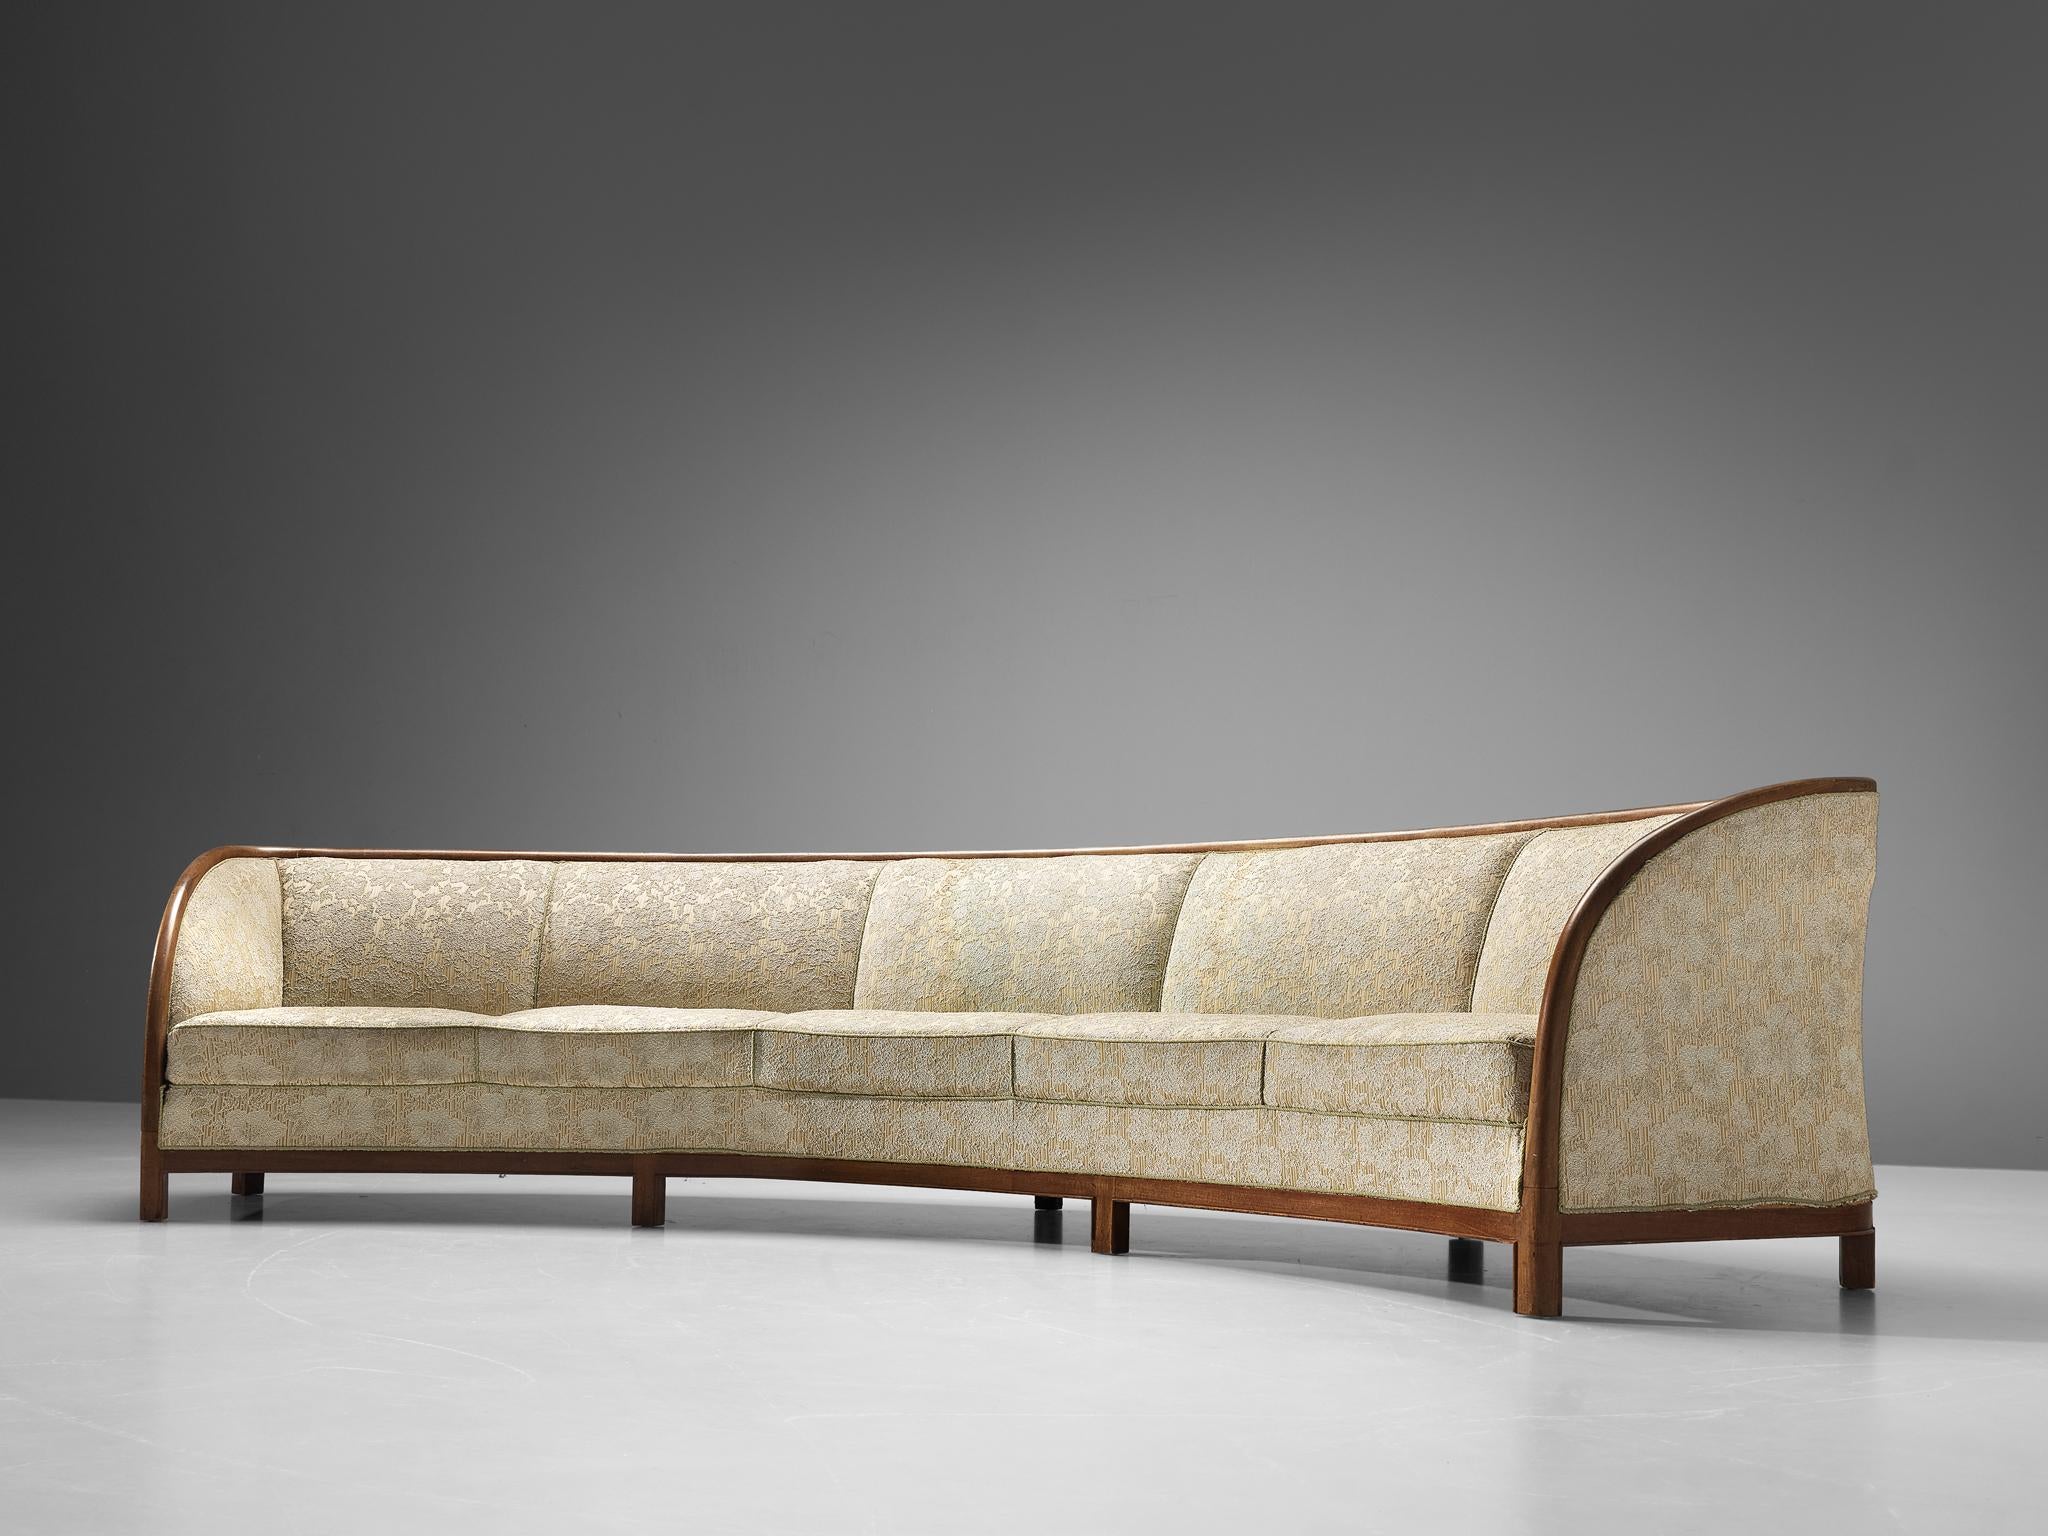 Large Curved Danish Sofa in Light Fabric Upholstery